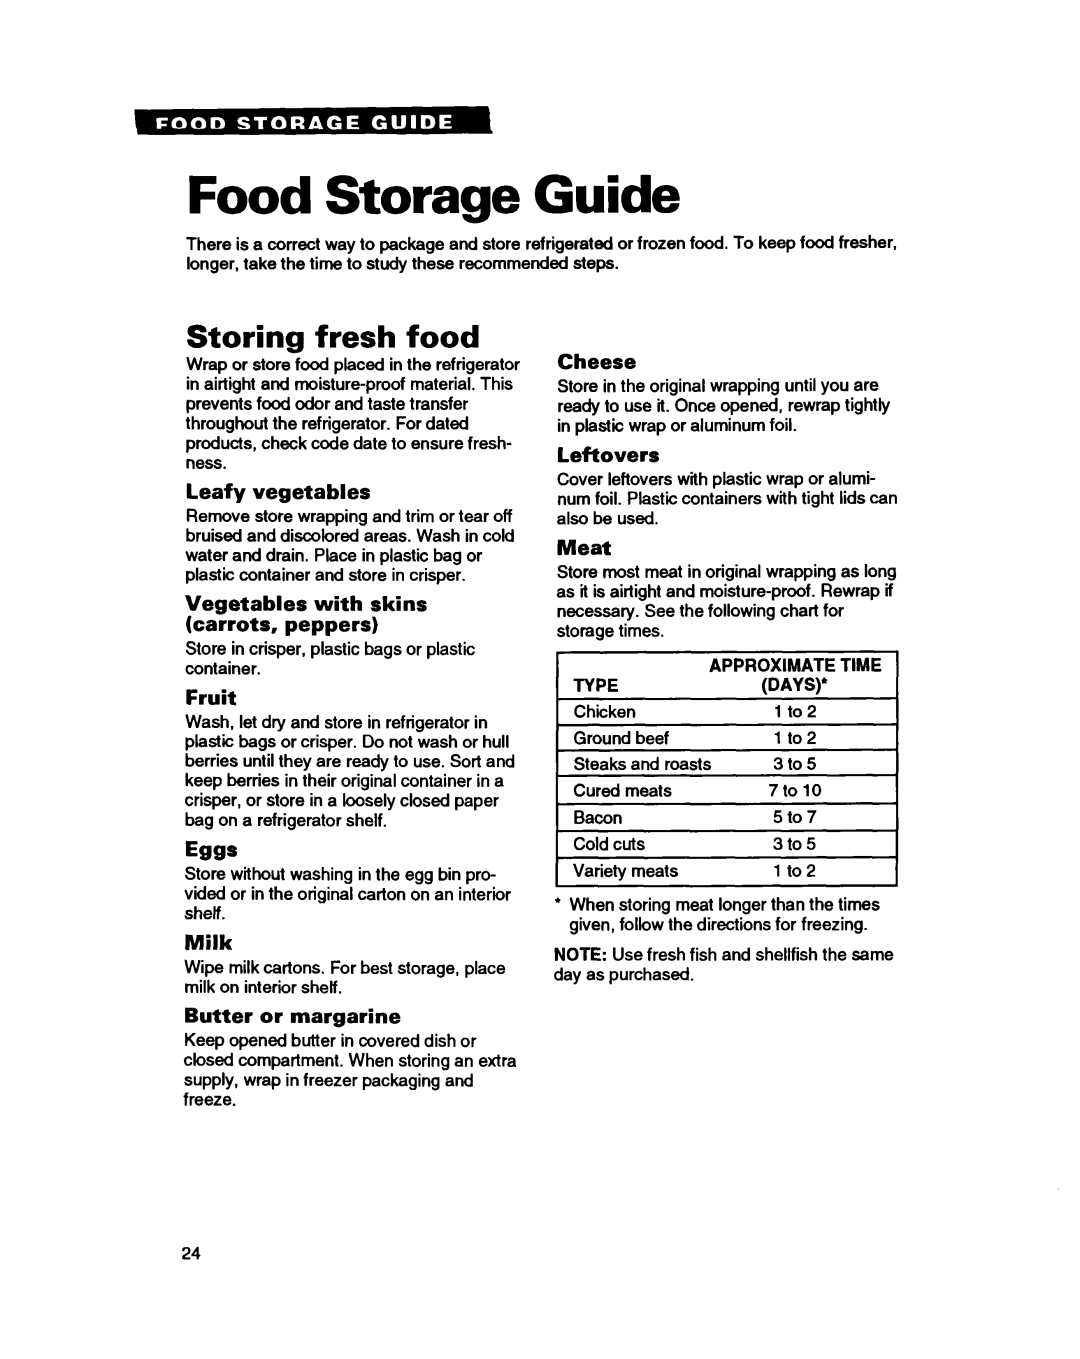 Whirlpool ET25DQ Food Storage Guide, Storing fresh food, Leafy vegetables, Vegetables with skins carrots, peppers, Fruit 